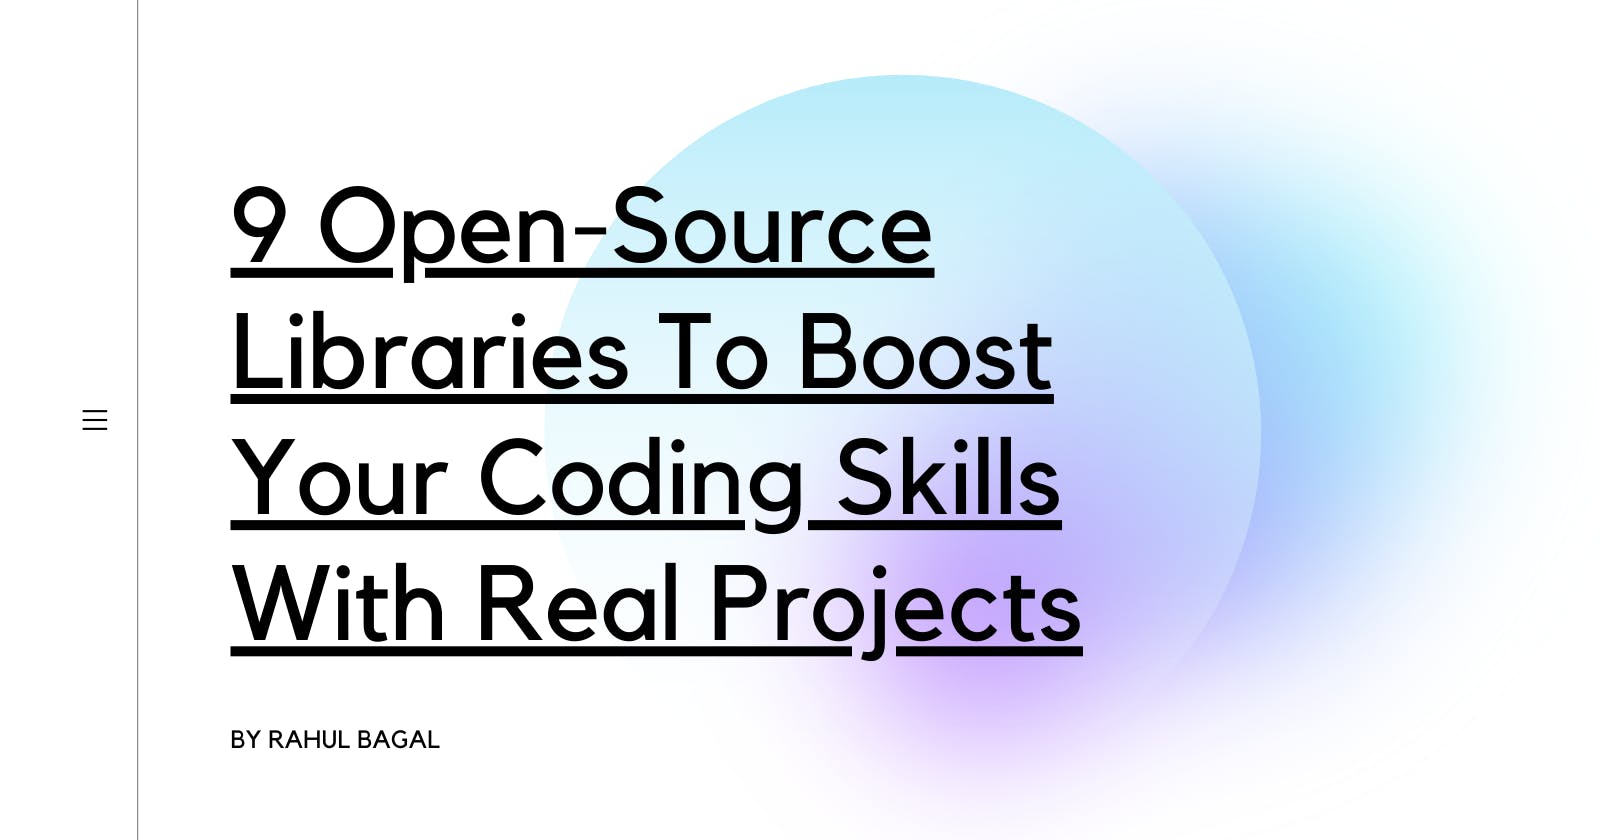 9 Open-Source Libraries To Boost Your Coding Skills With Real Projects